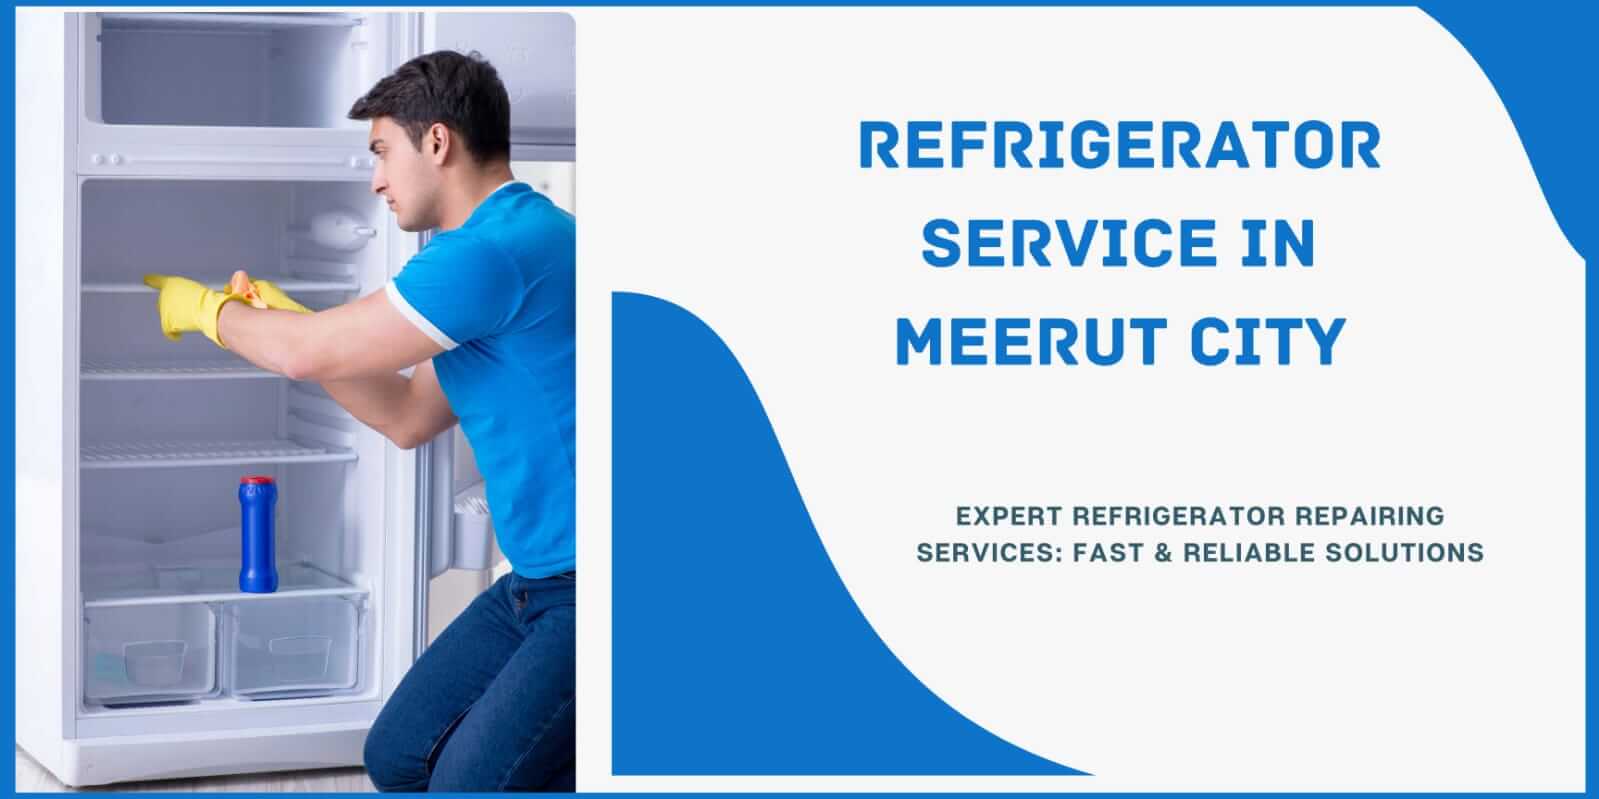 we are providing best refrigerator repair services in Meerut city.